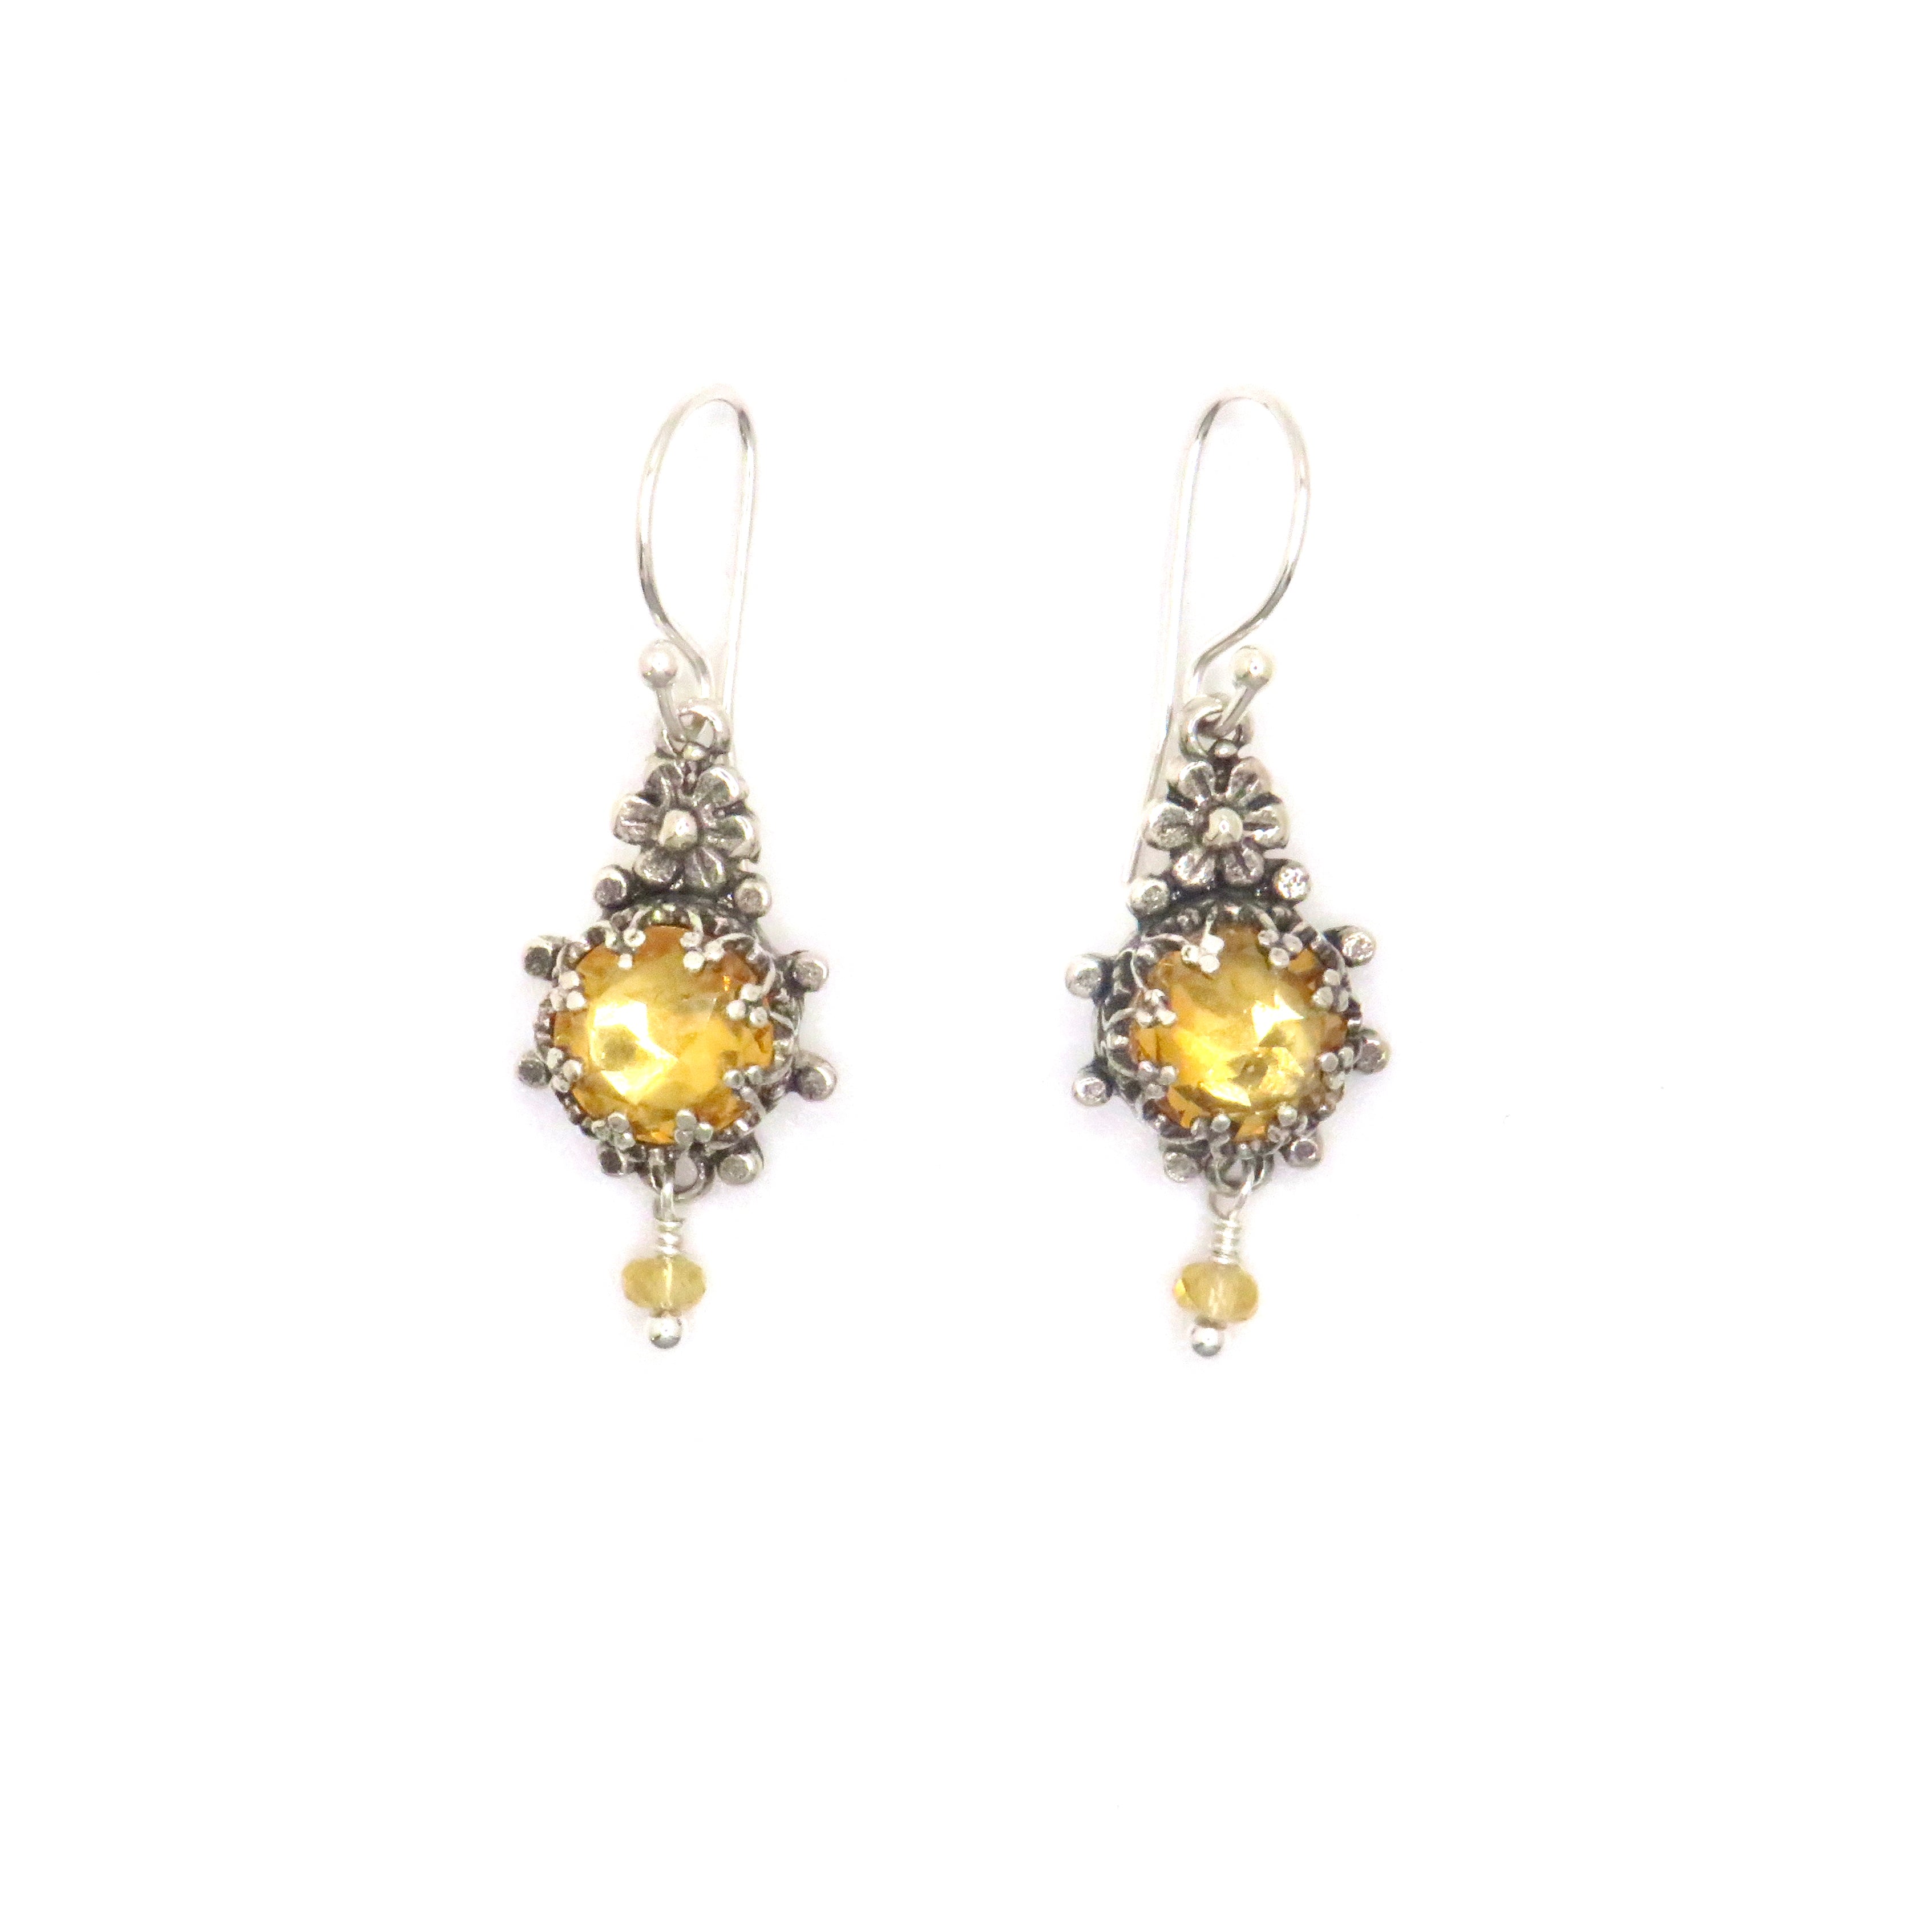 silver earrings with yellow gemstone